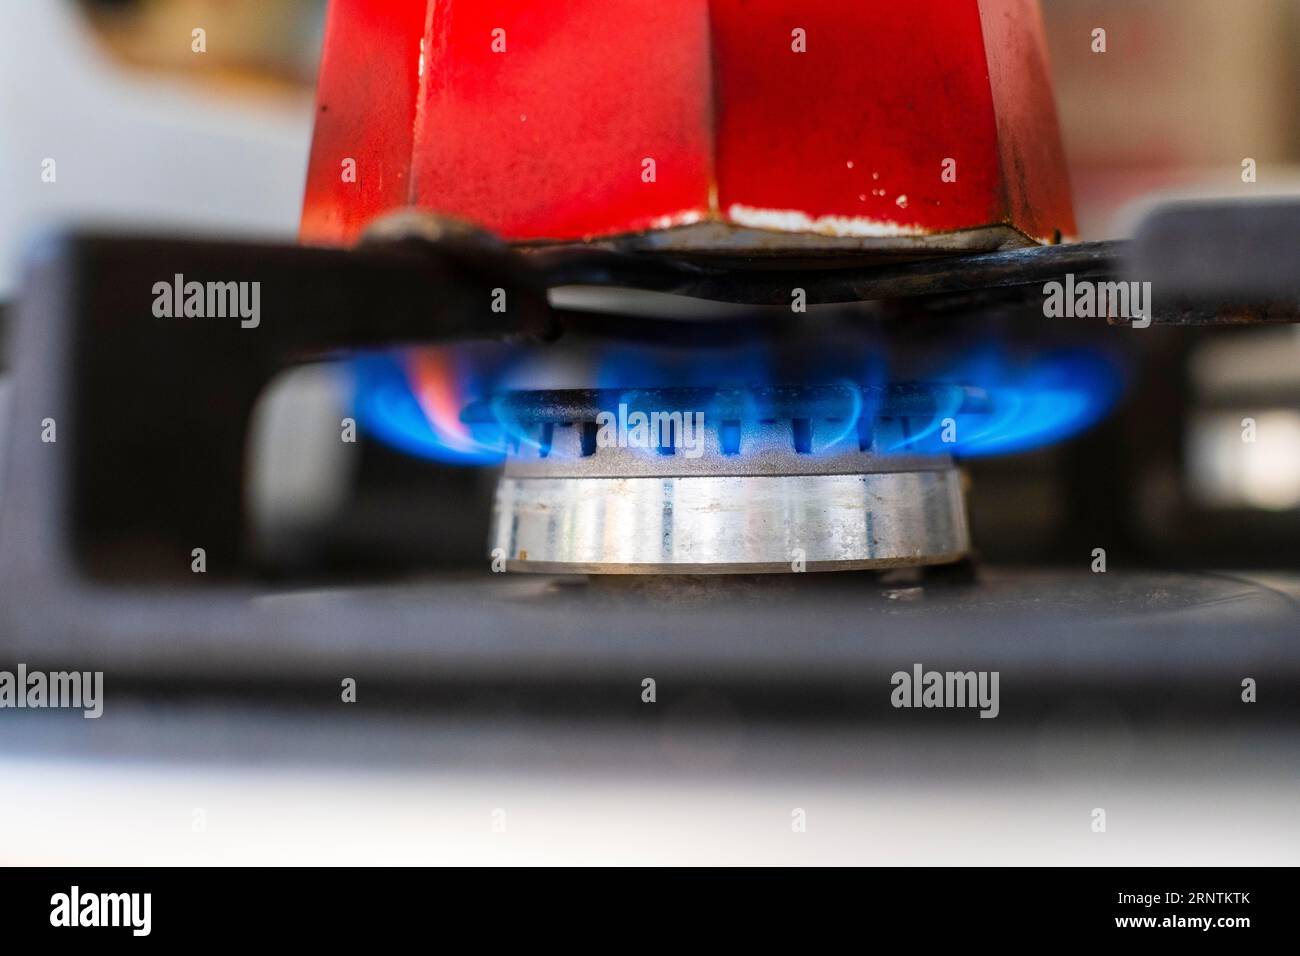 Espresso maker over a flame on a gas cooker Stock Photo